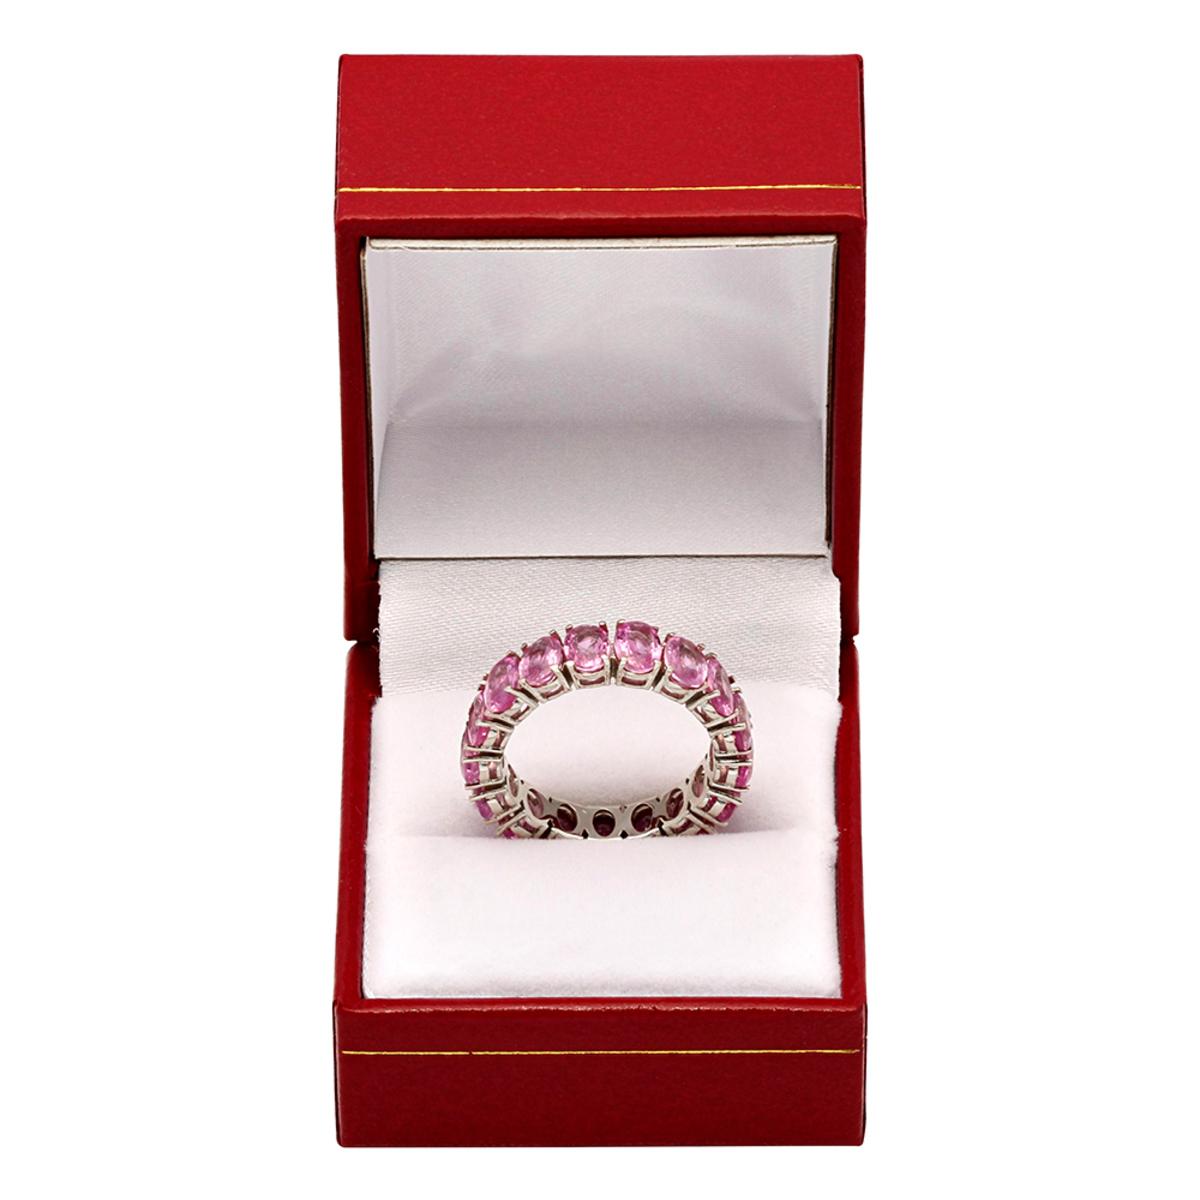 14k White Gold 10.04ct Pink Sapphire Eternity Band Ring